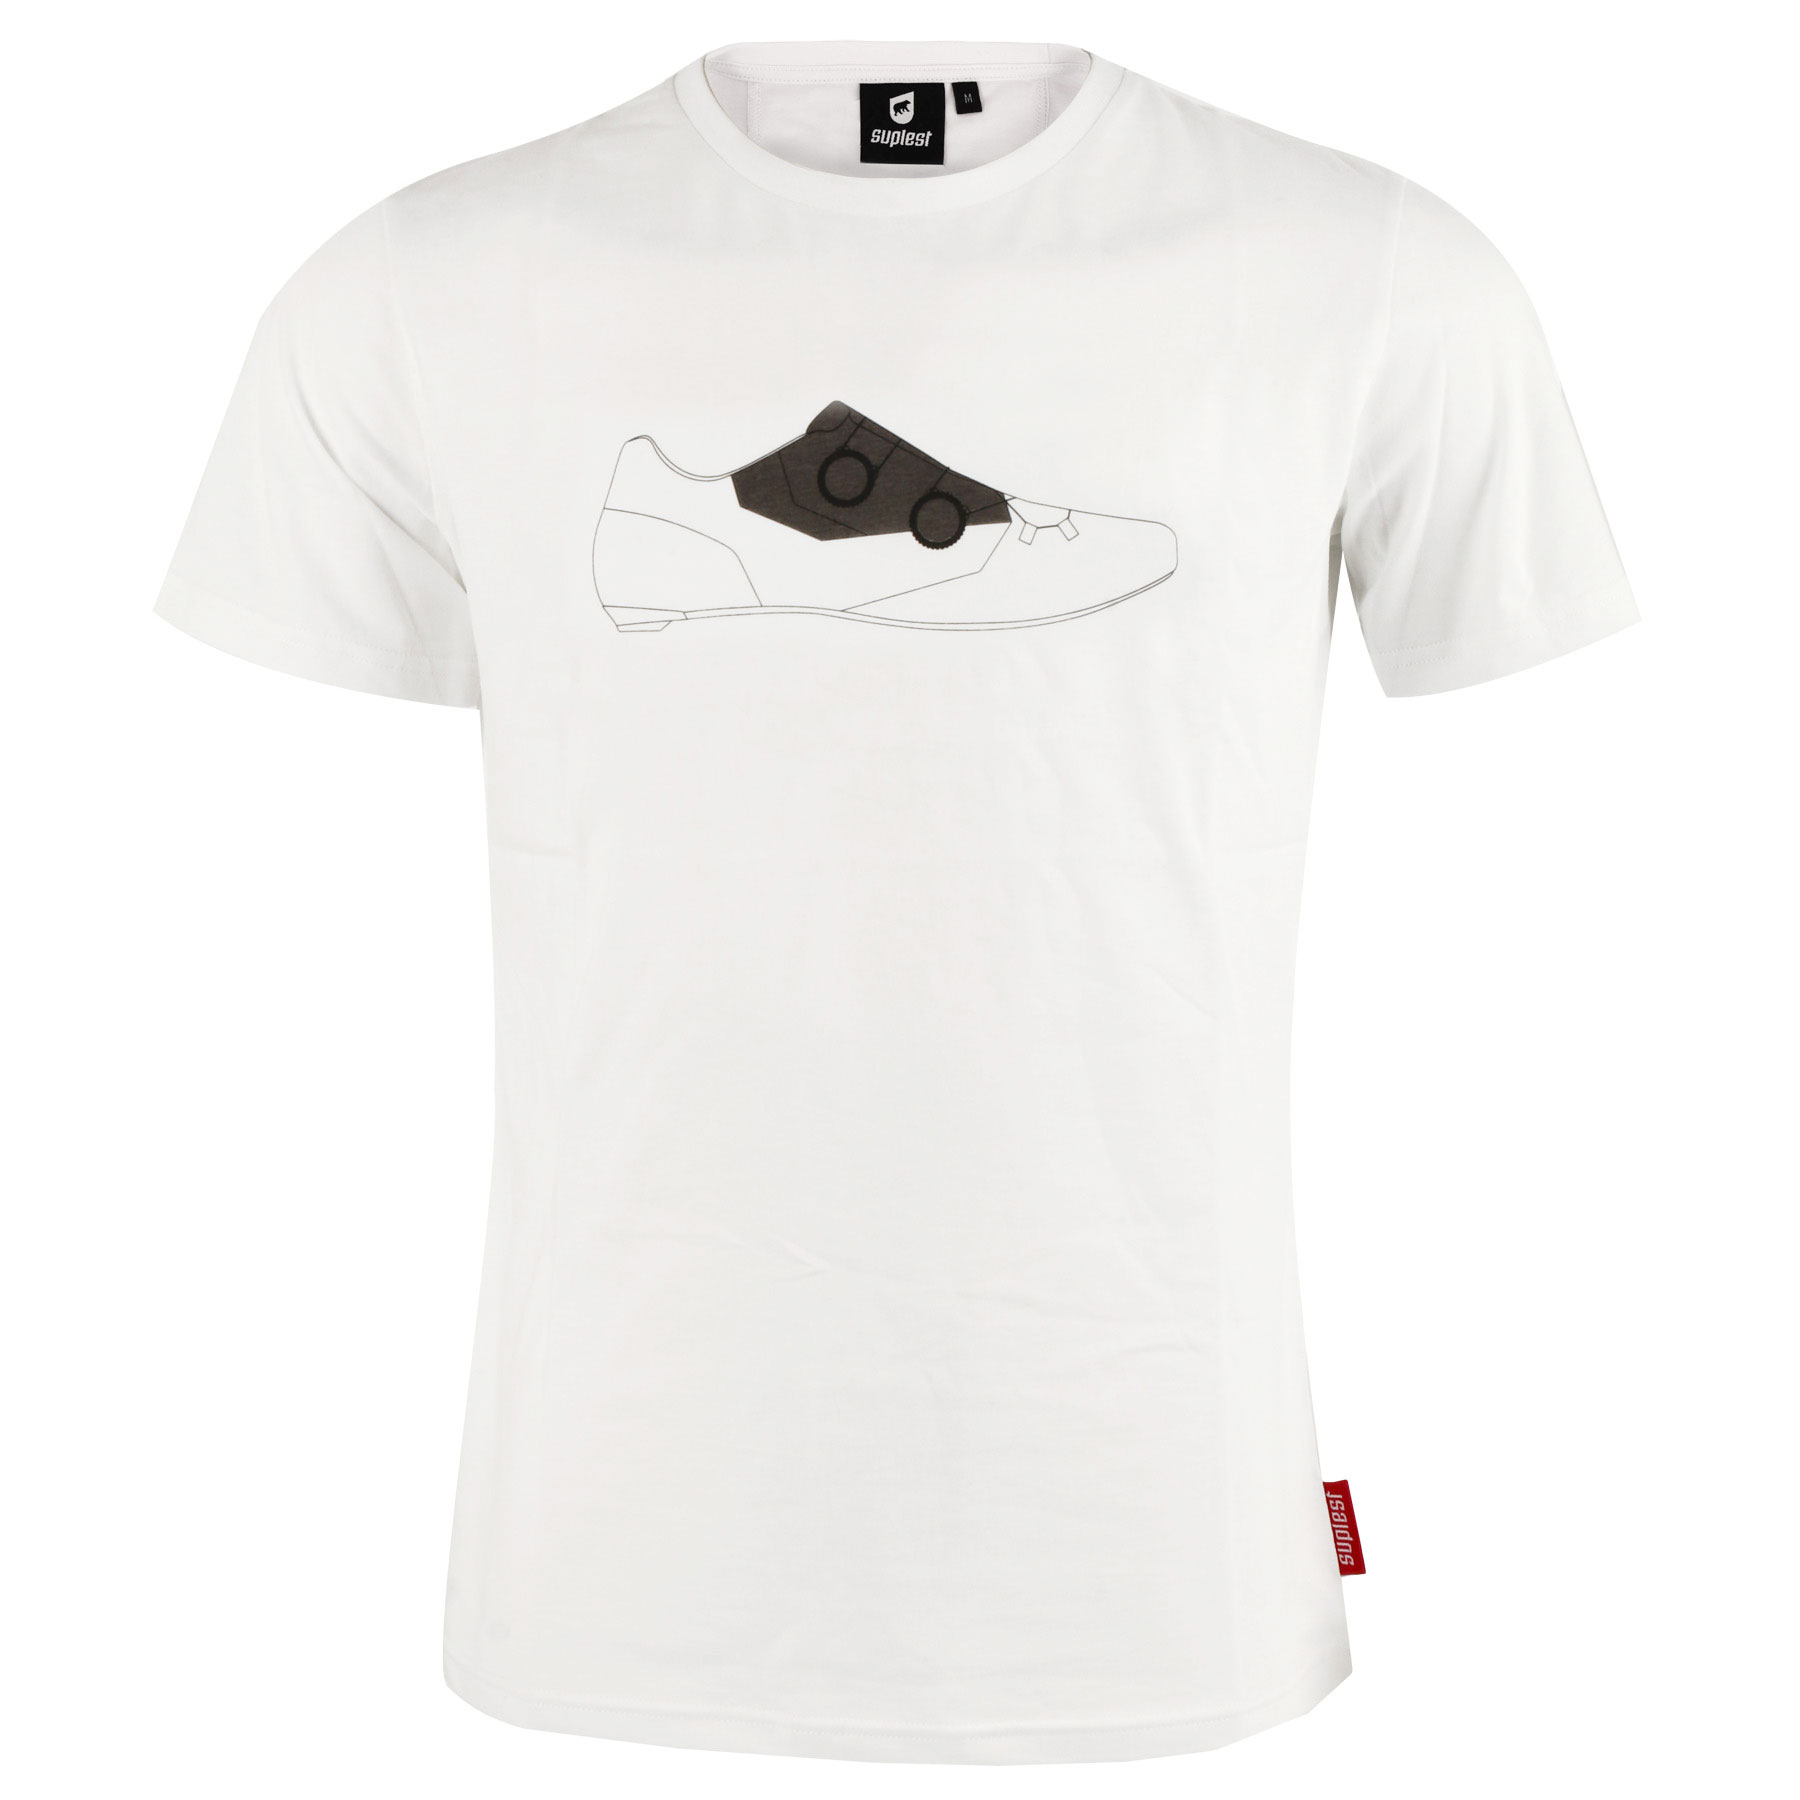 Picture of Suplest Shoe T-Shirt - white 05.062.